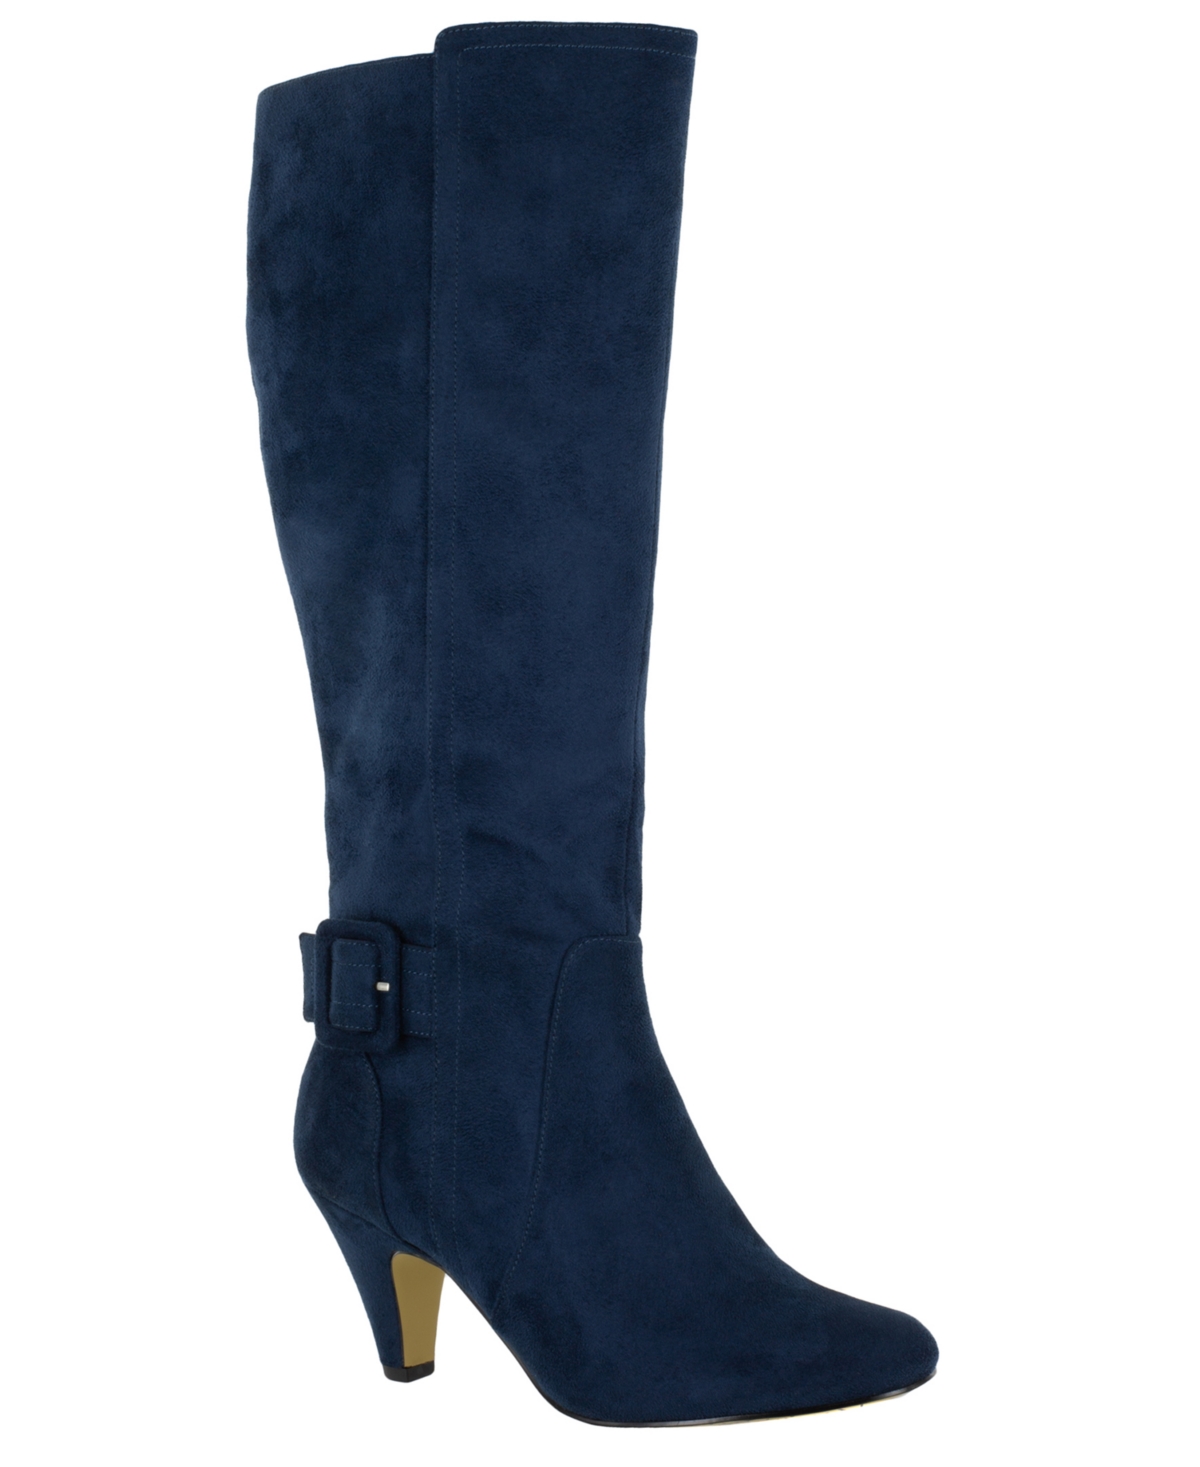 Troy Ii Tall Dress Boots - Navy Suede